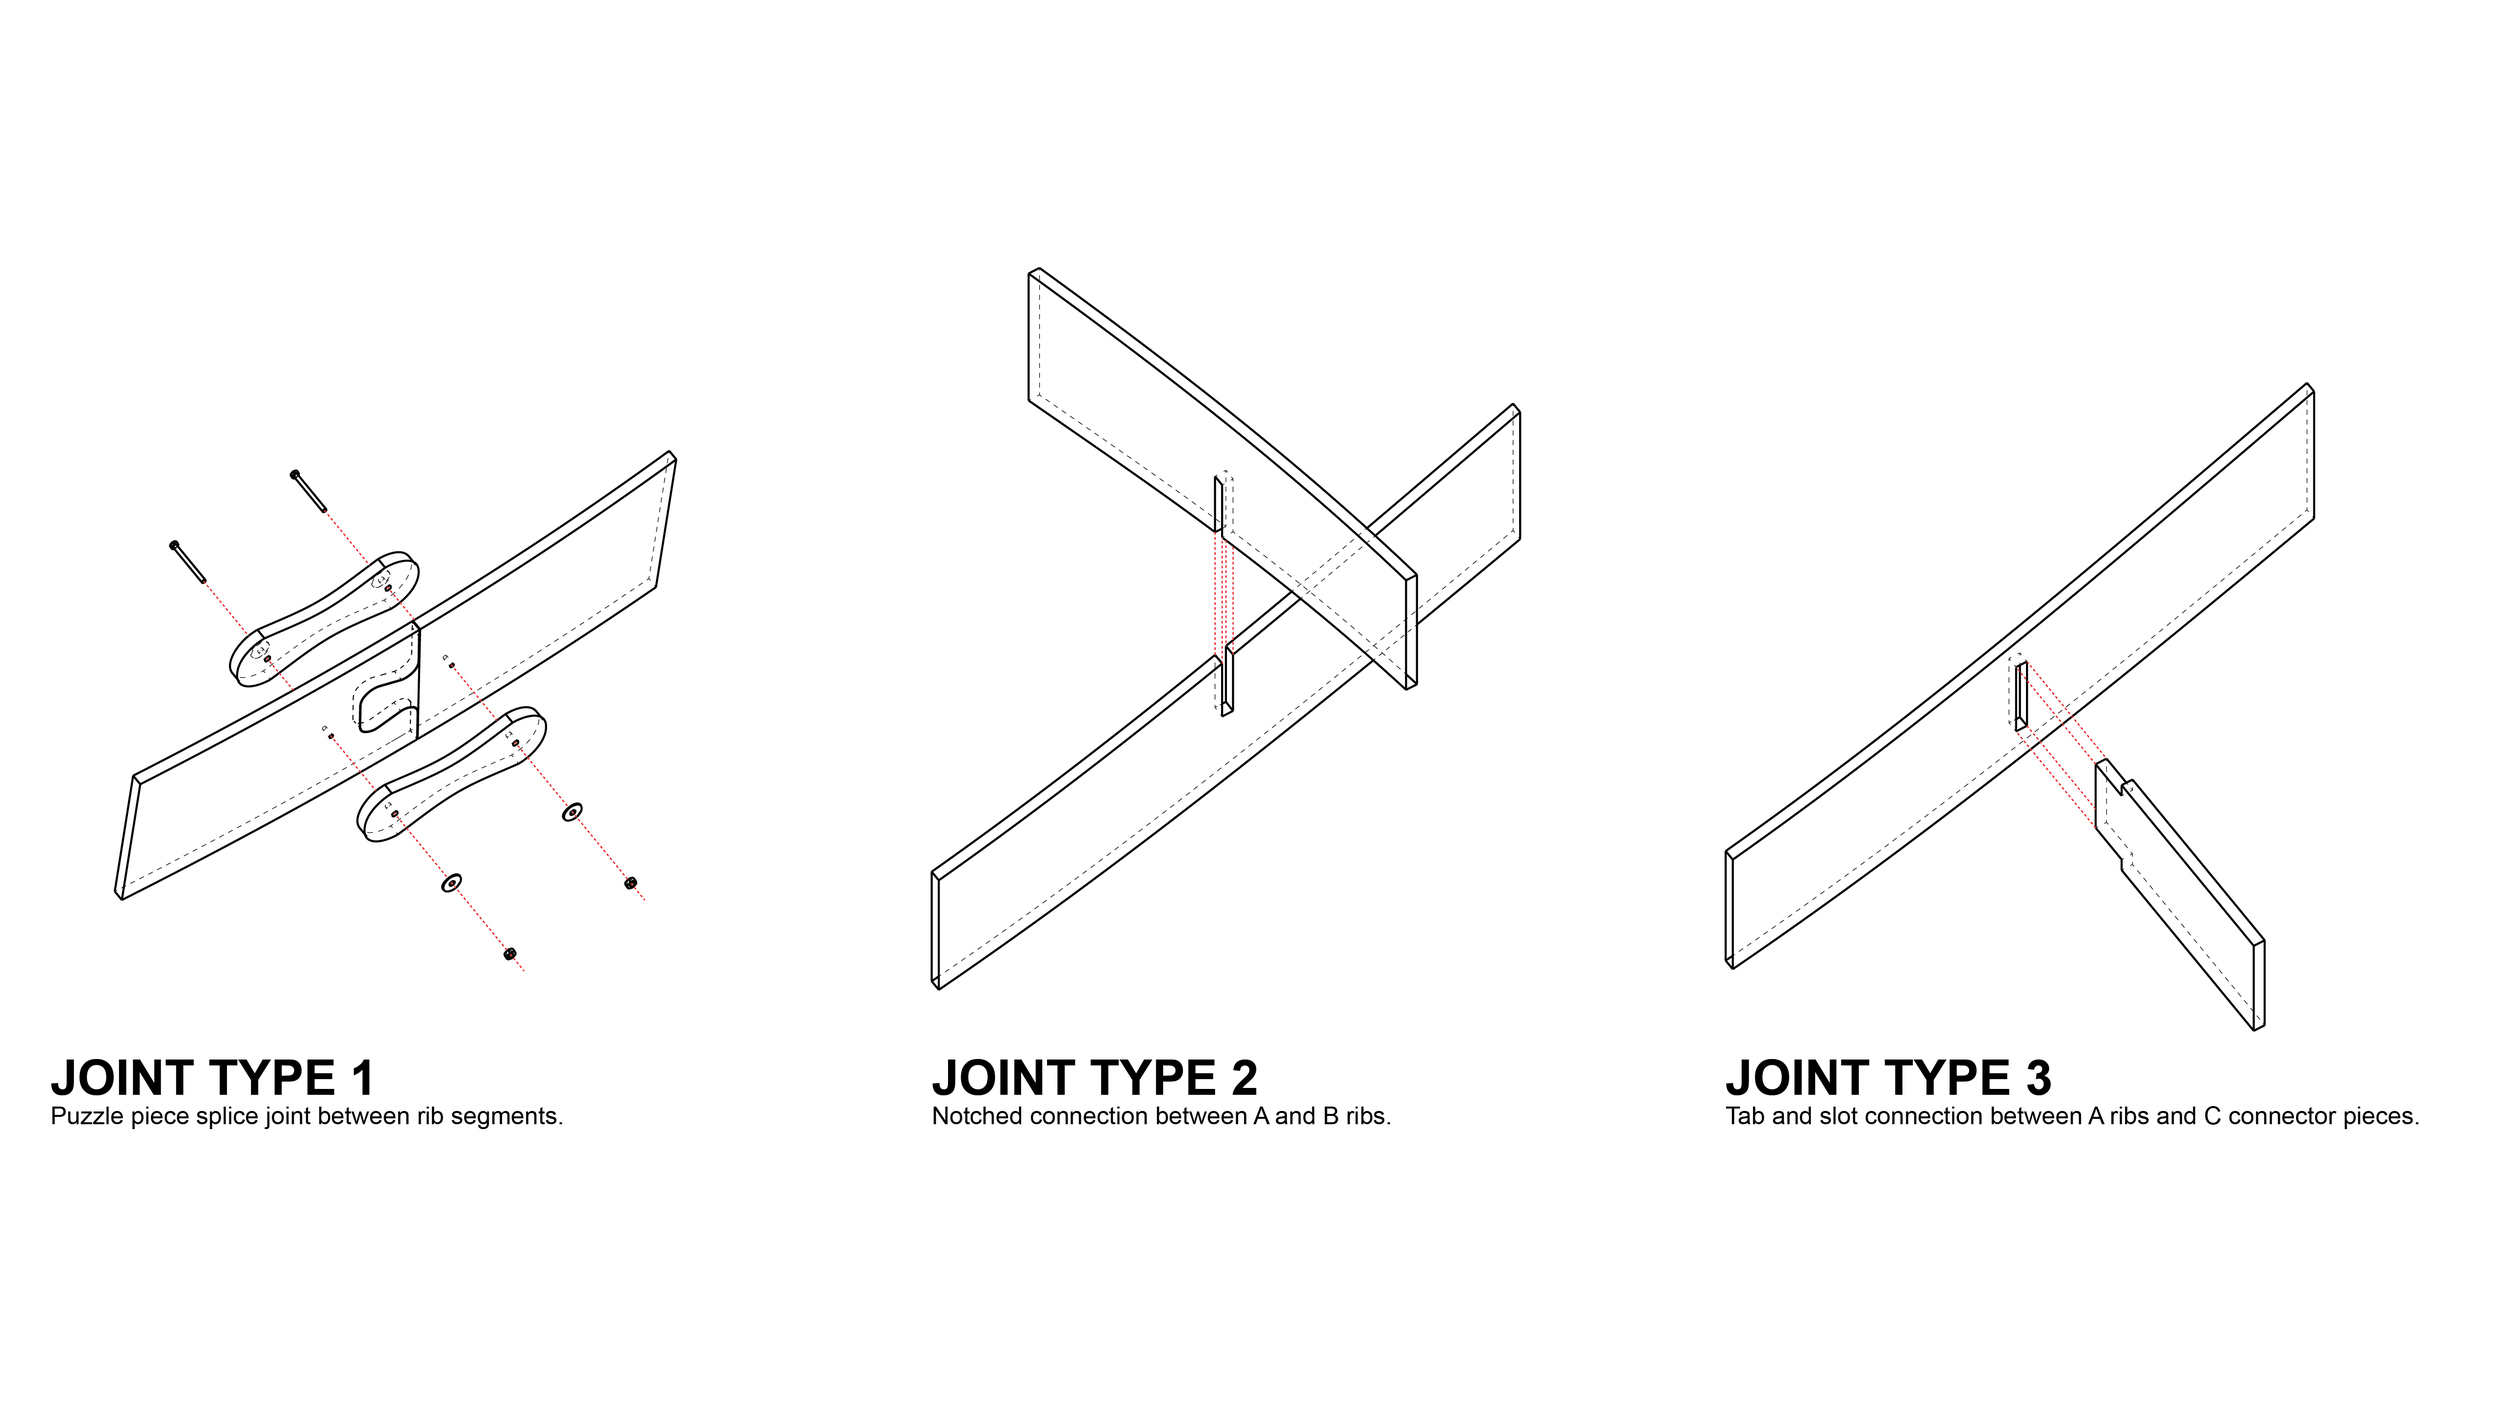  Structural Joint Types 